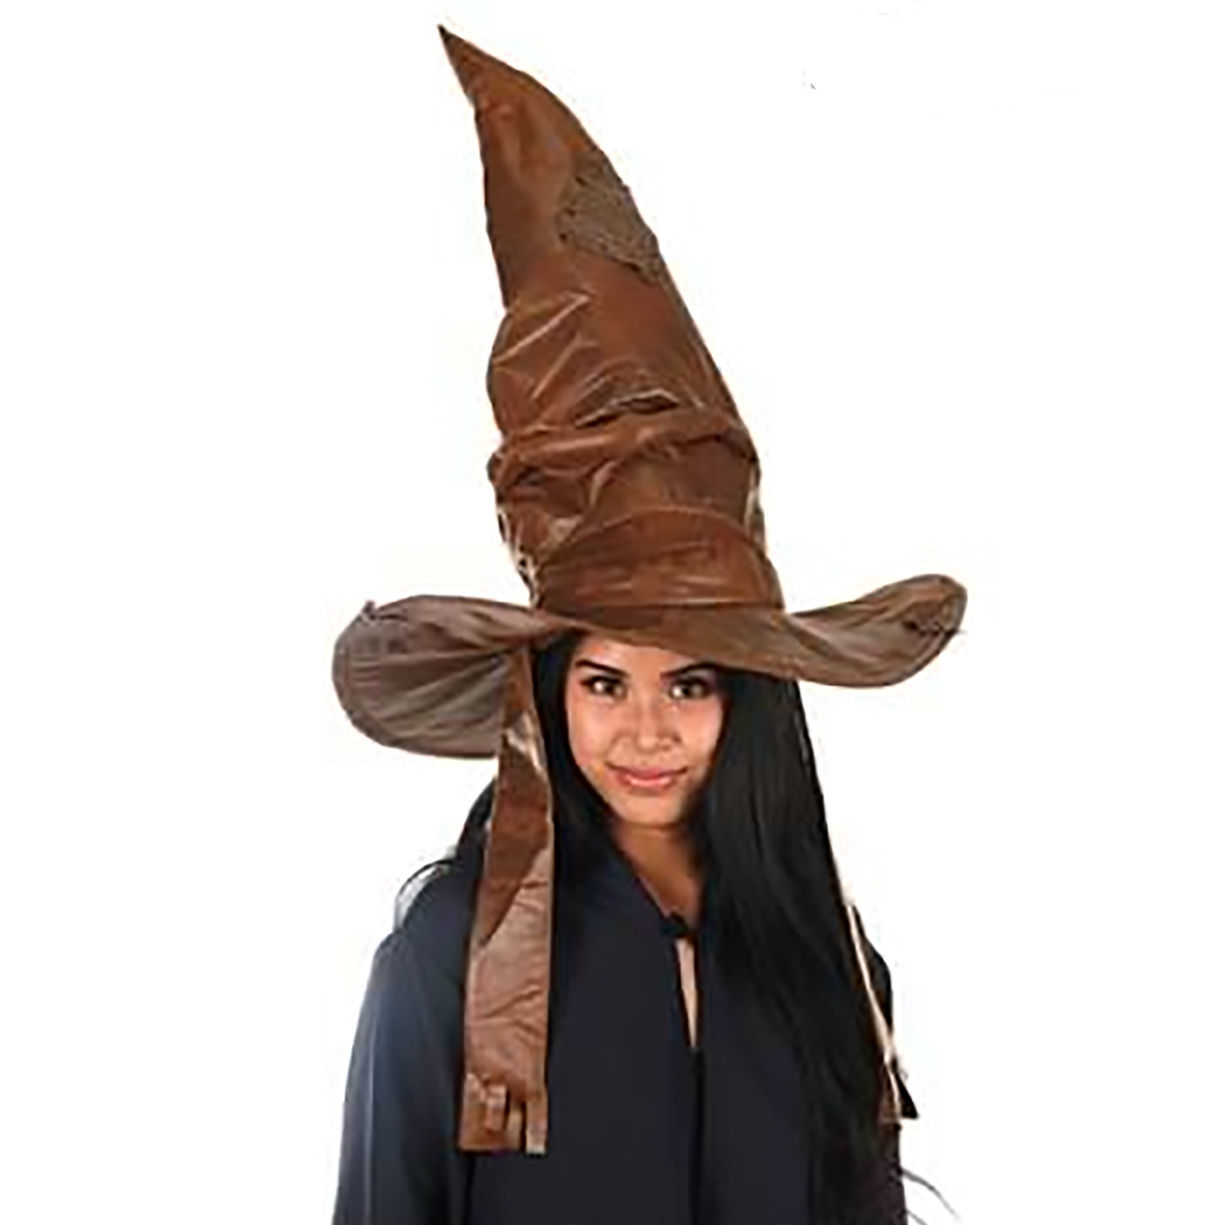 Harry Potter Sorting Hat has mouth on the front that can open, a small hidden pocket inside and an adjustable strap